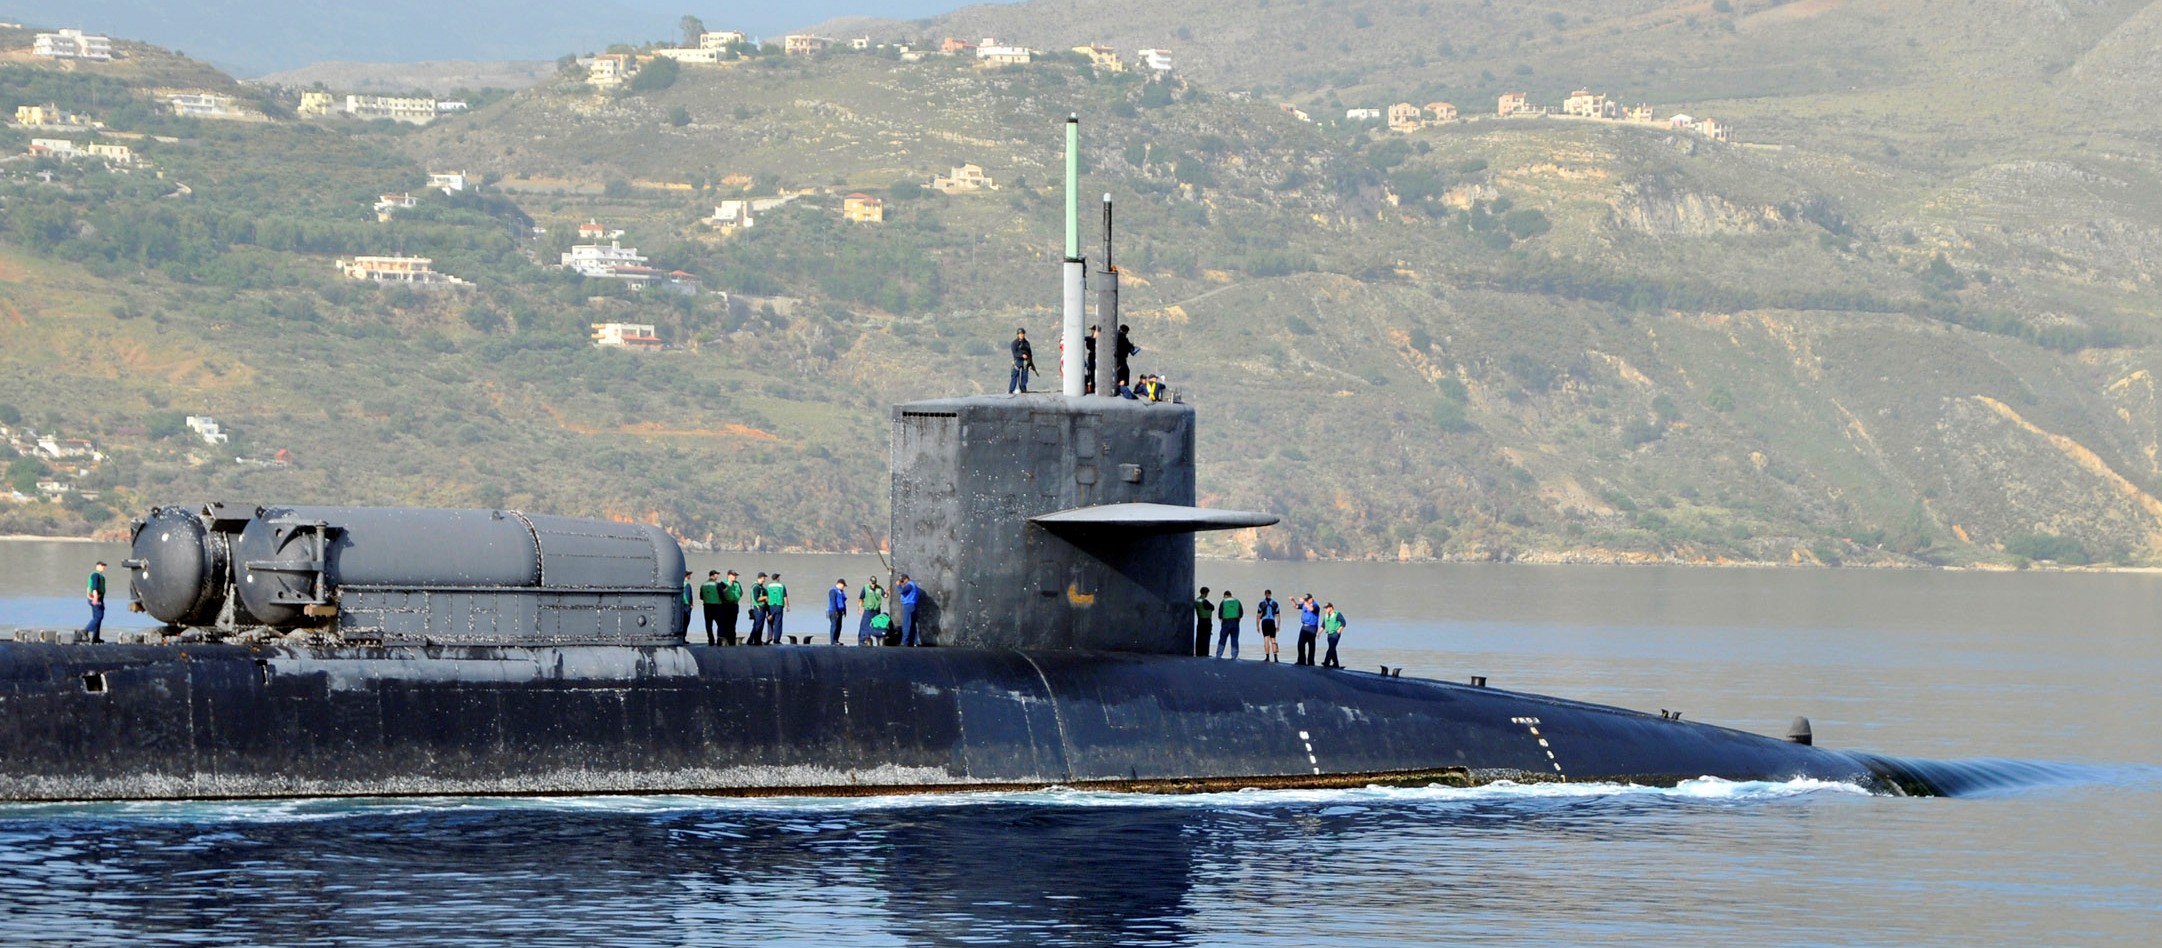 ssgn-728 uss florida guided missile submarine us navy 2013 17